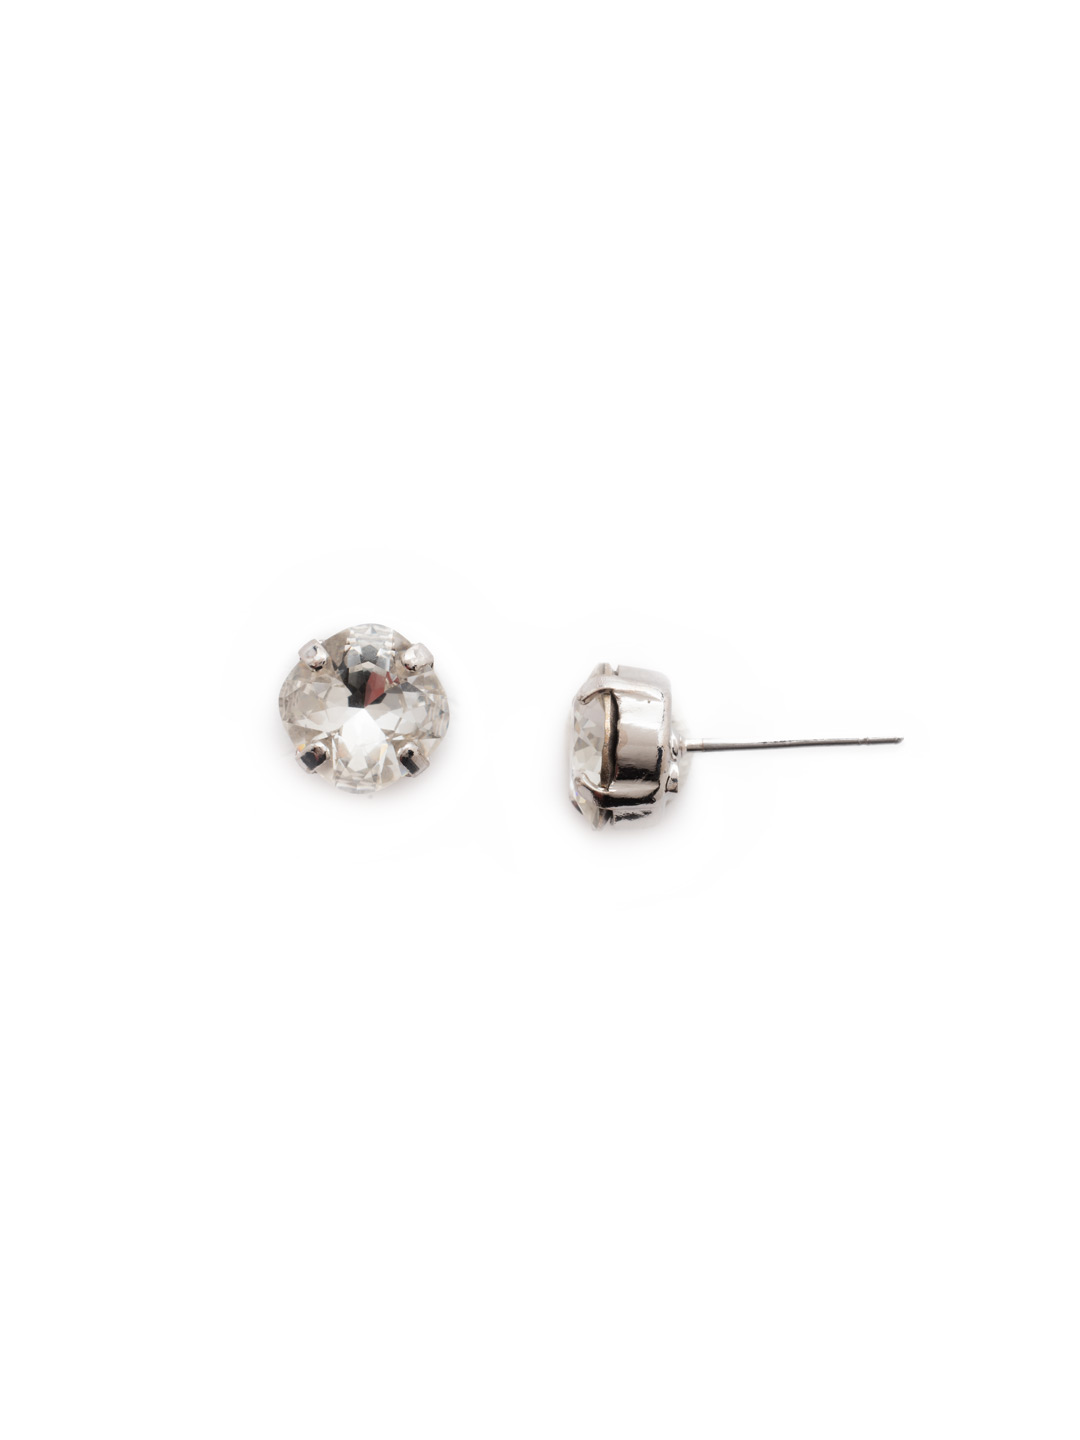 Shop One and Only Stud Earrings